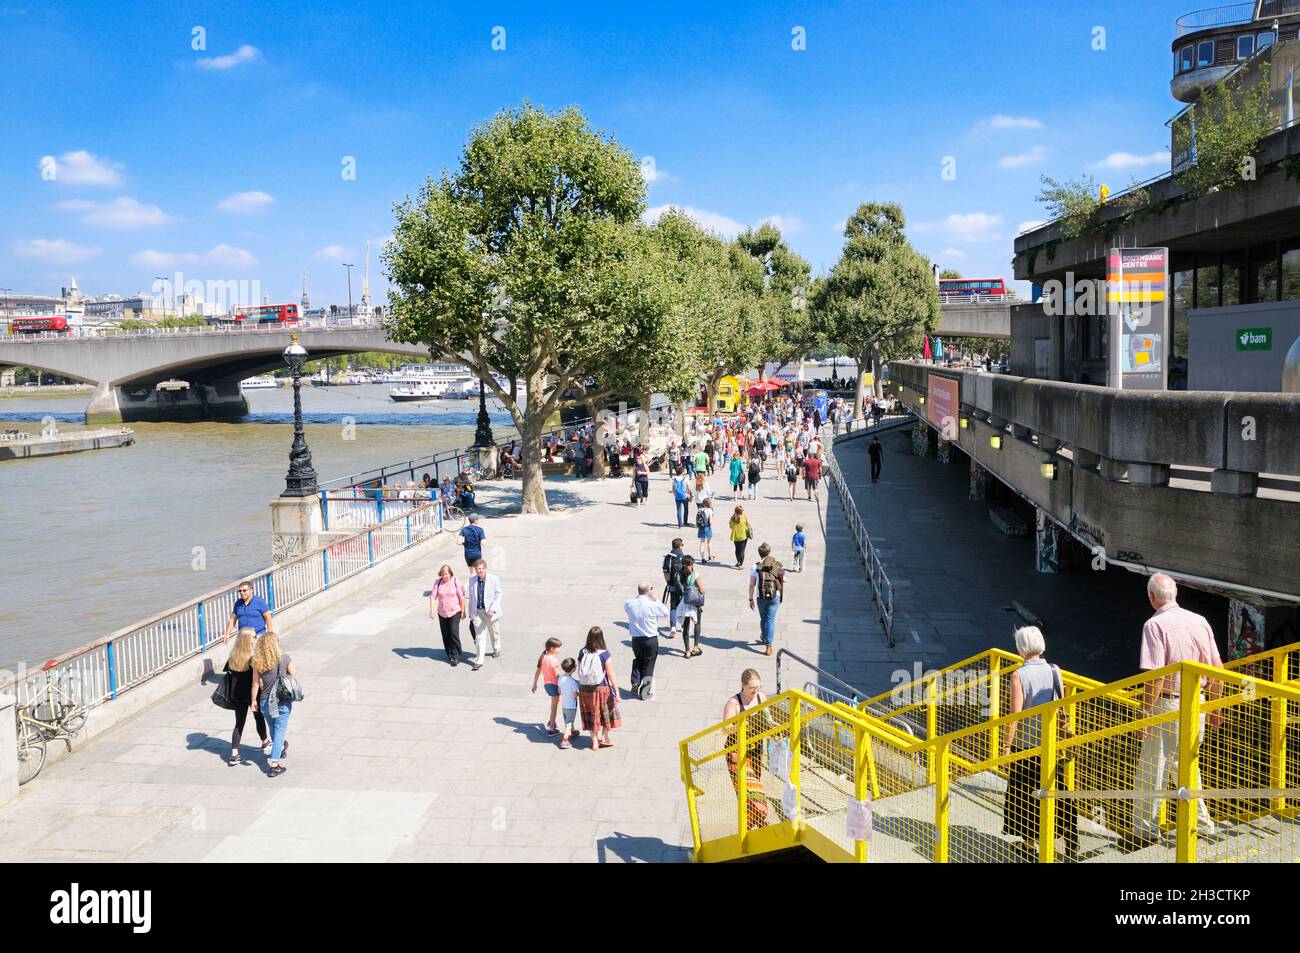 London's South Bank in summer.  People walking along Queen's Walk on Thames Path next to the Southbank Centre on a warm sunny day. London, England, UK Stock Photo